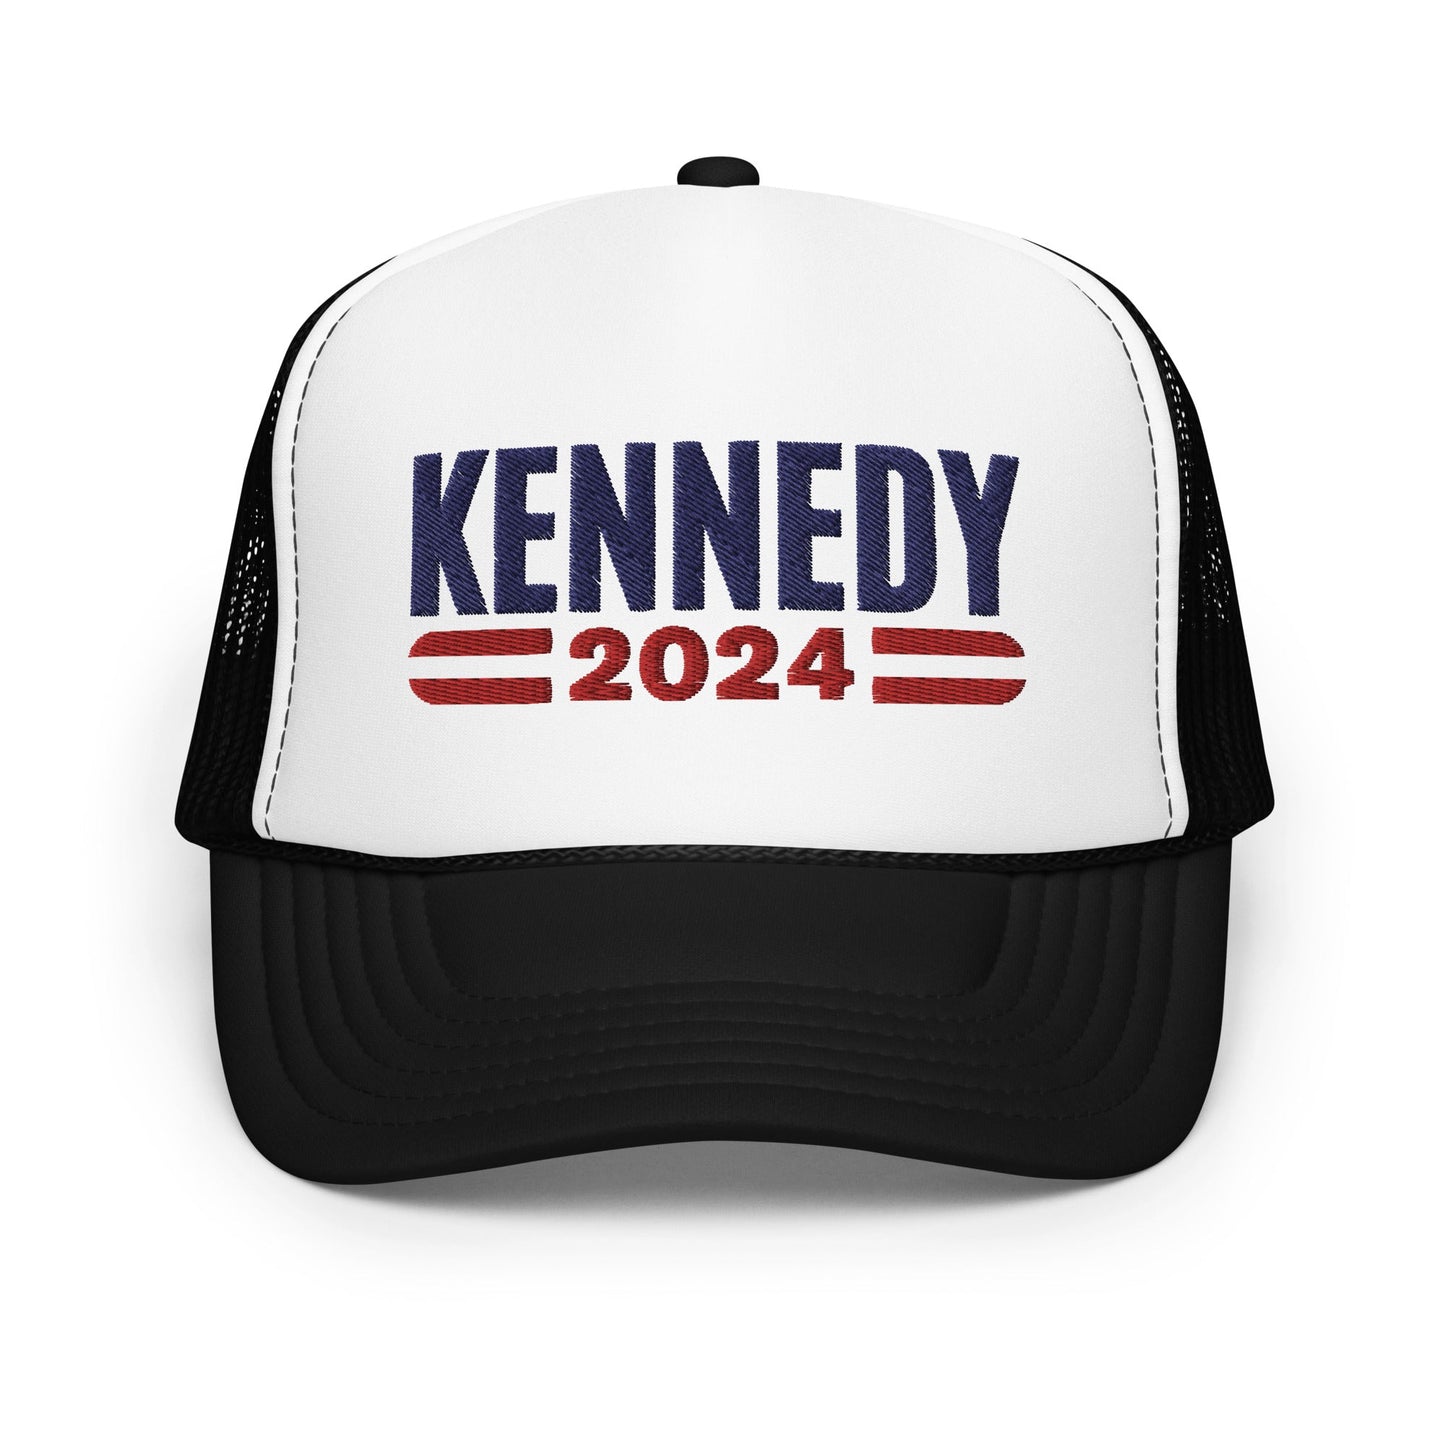 Kennedy Classic Foam Trucker Hat - TEAM KENNEDY. All rights reserved